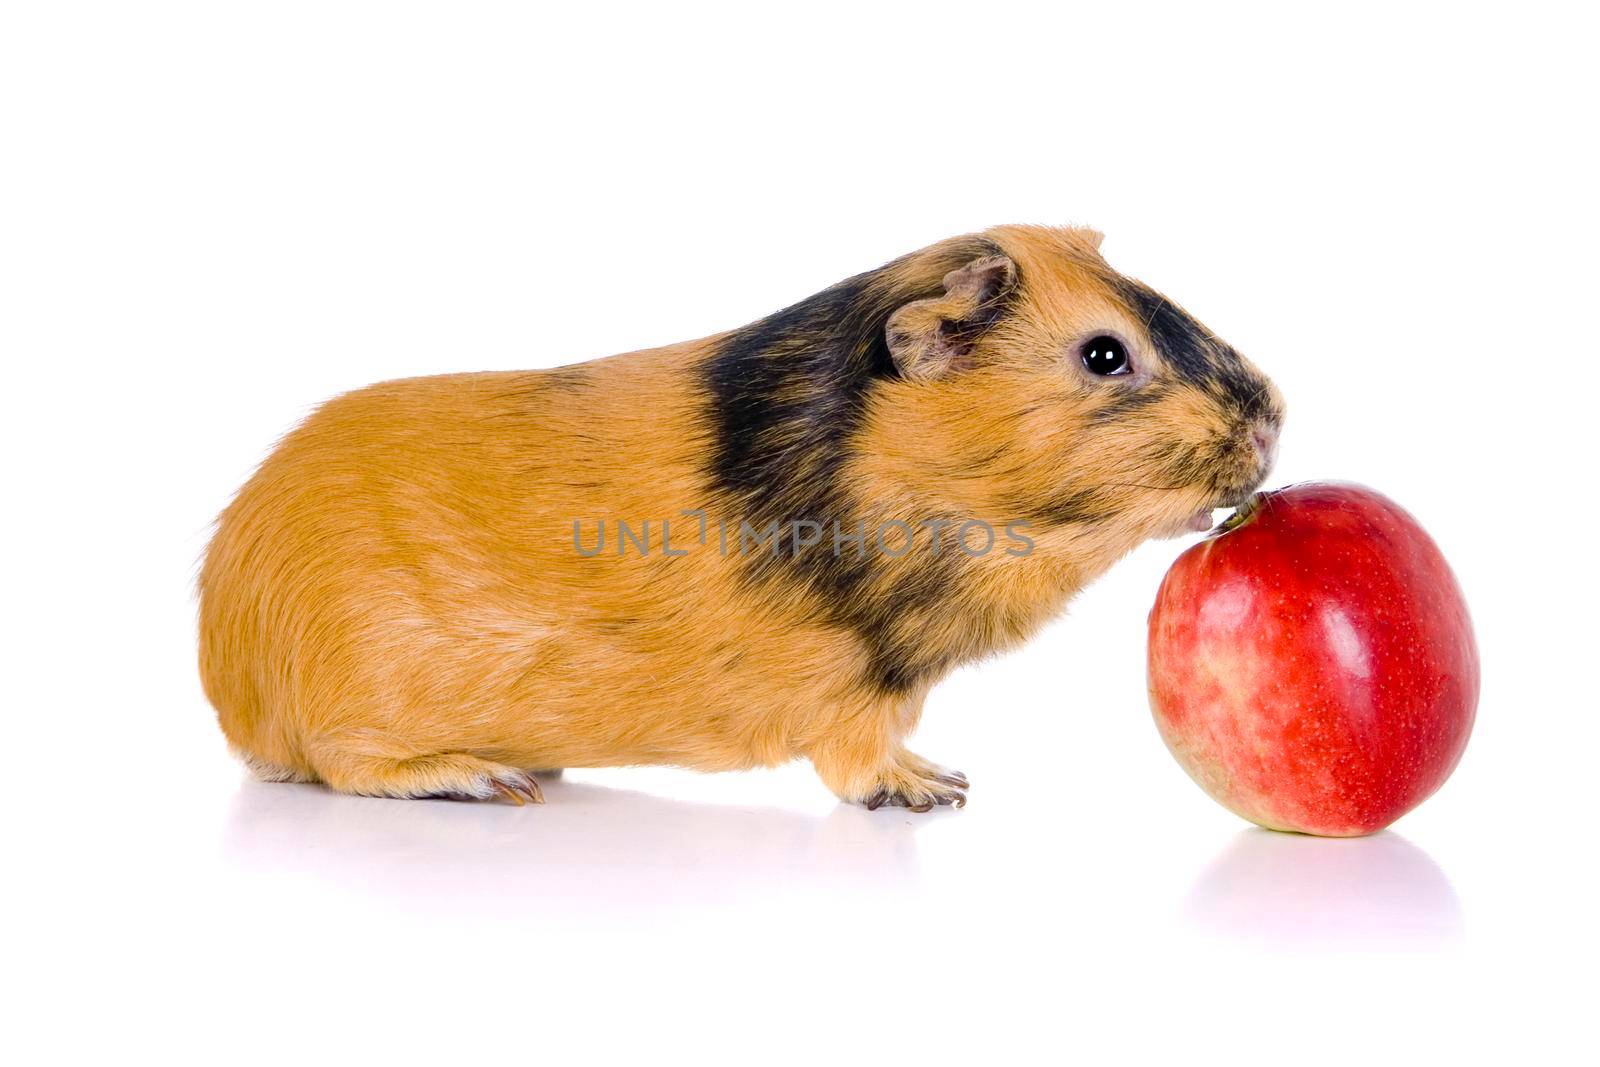 Guinea pig eats an apple. Isolation on the white